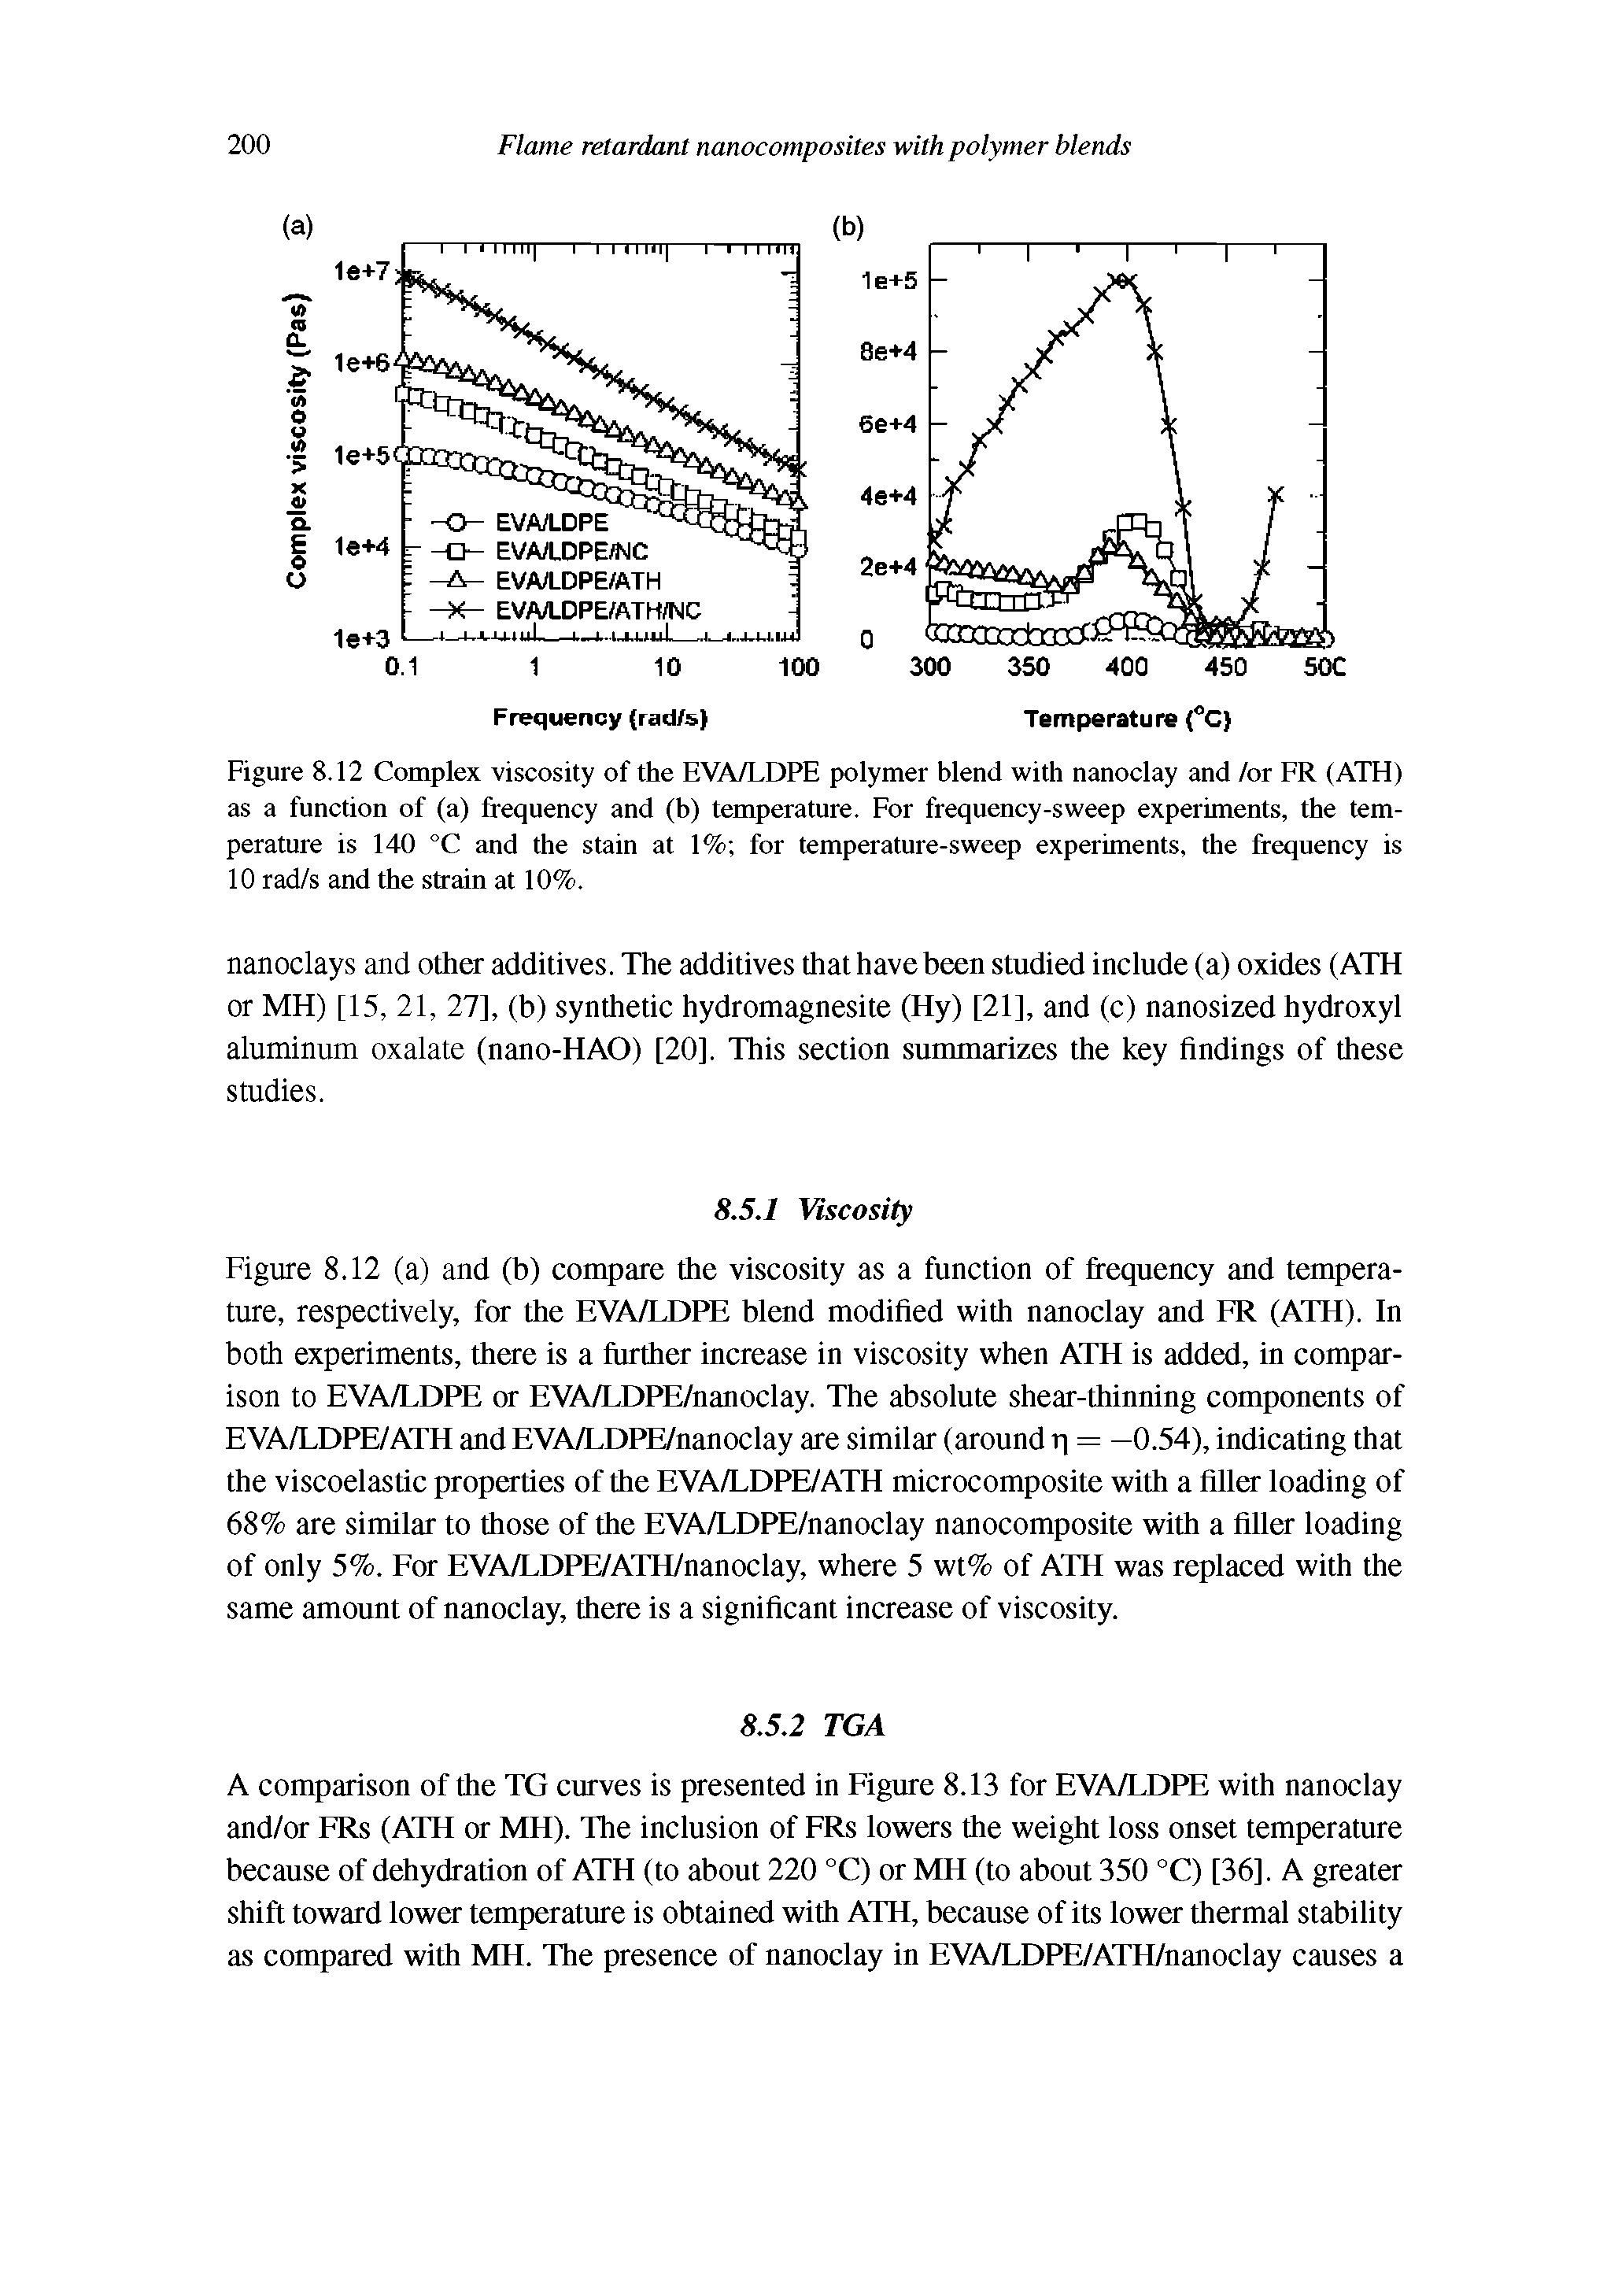 Figure 8.12 Complex viscosity of the EVA/LDPE polymer blend with nanoclay and /or FR (ATH) as a function of (a) frequency and (b) temperature. For frequency-sweep experiments, the temperature is 140 °C and the stain at 1% for temperature-sweep experiments, the frequency is 10 rad/s and the strain at 10%.